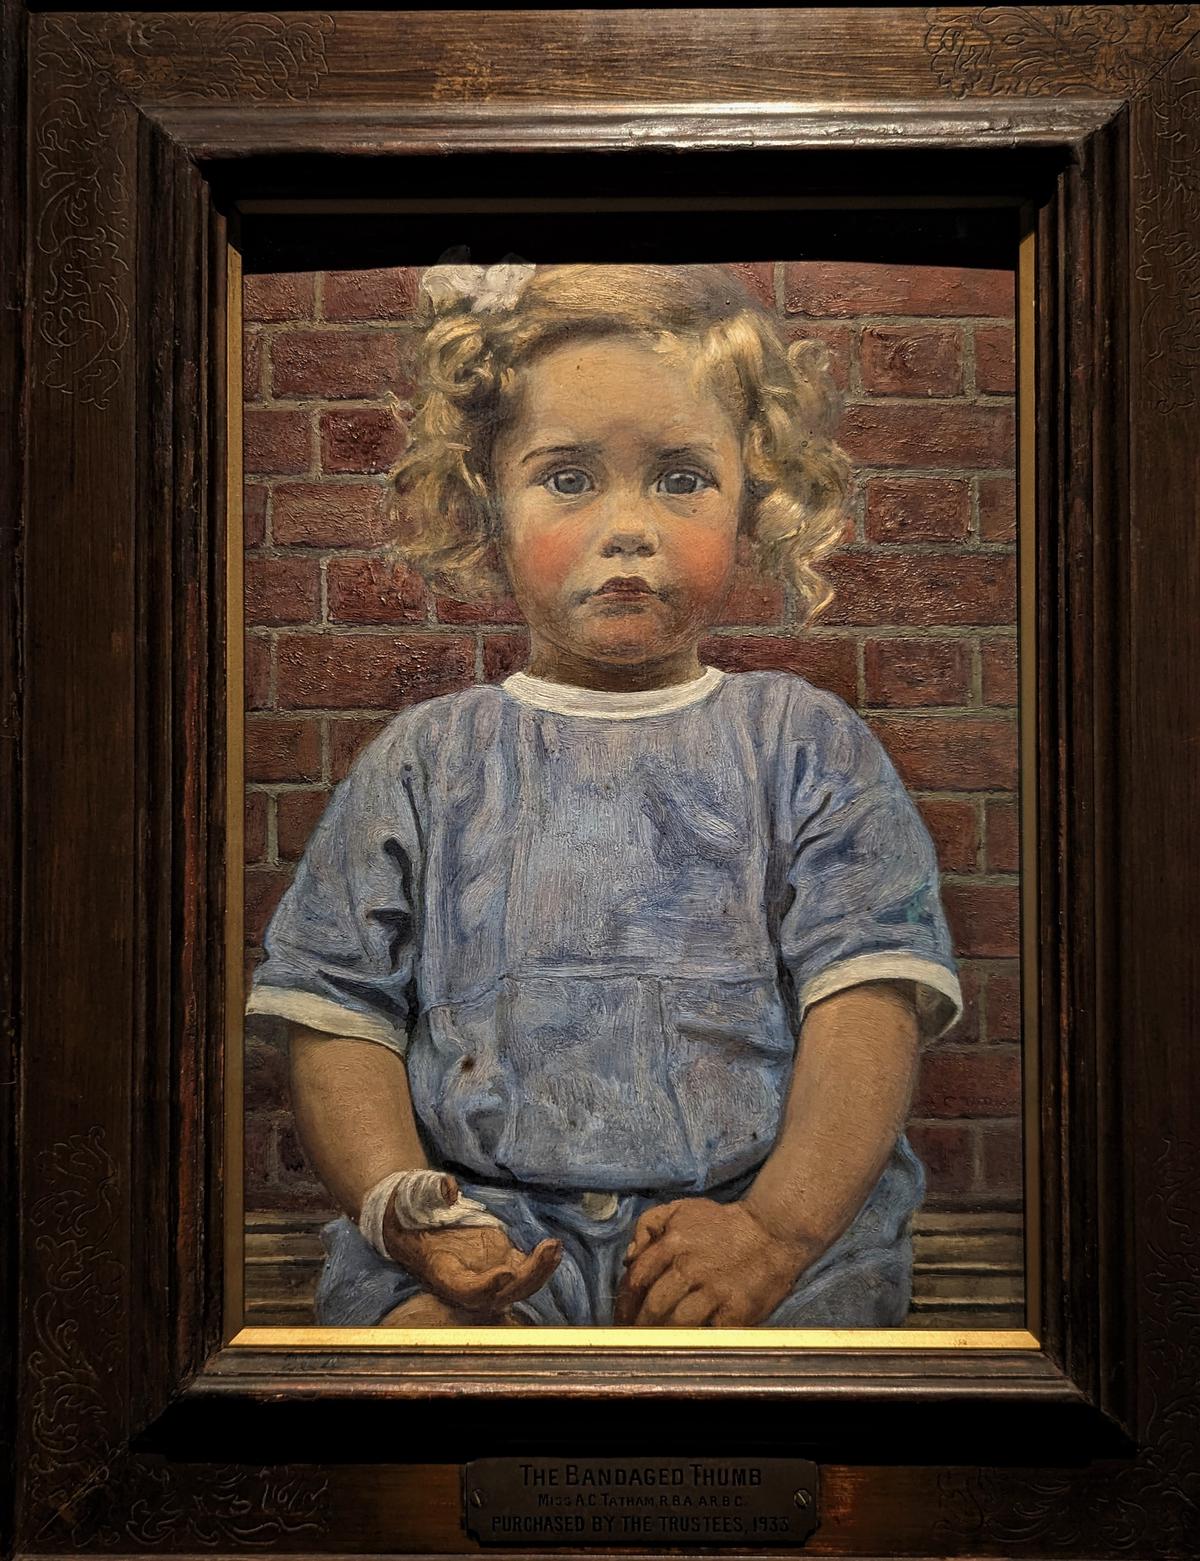 A 20th century painting titled, ‘The bandaged thumb’ by British artist Agnes Clara Tatham is featuring her three-year-old niece, Agnes Kjaerulf Knudsen, as the subject.